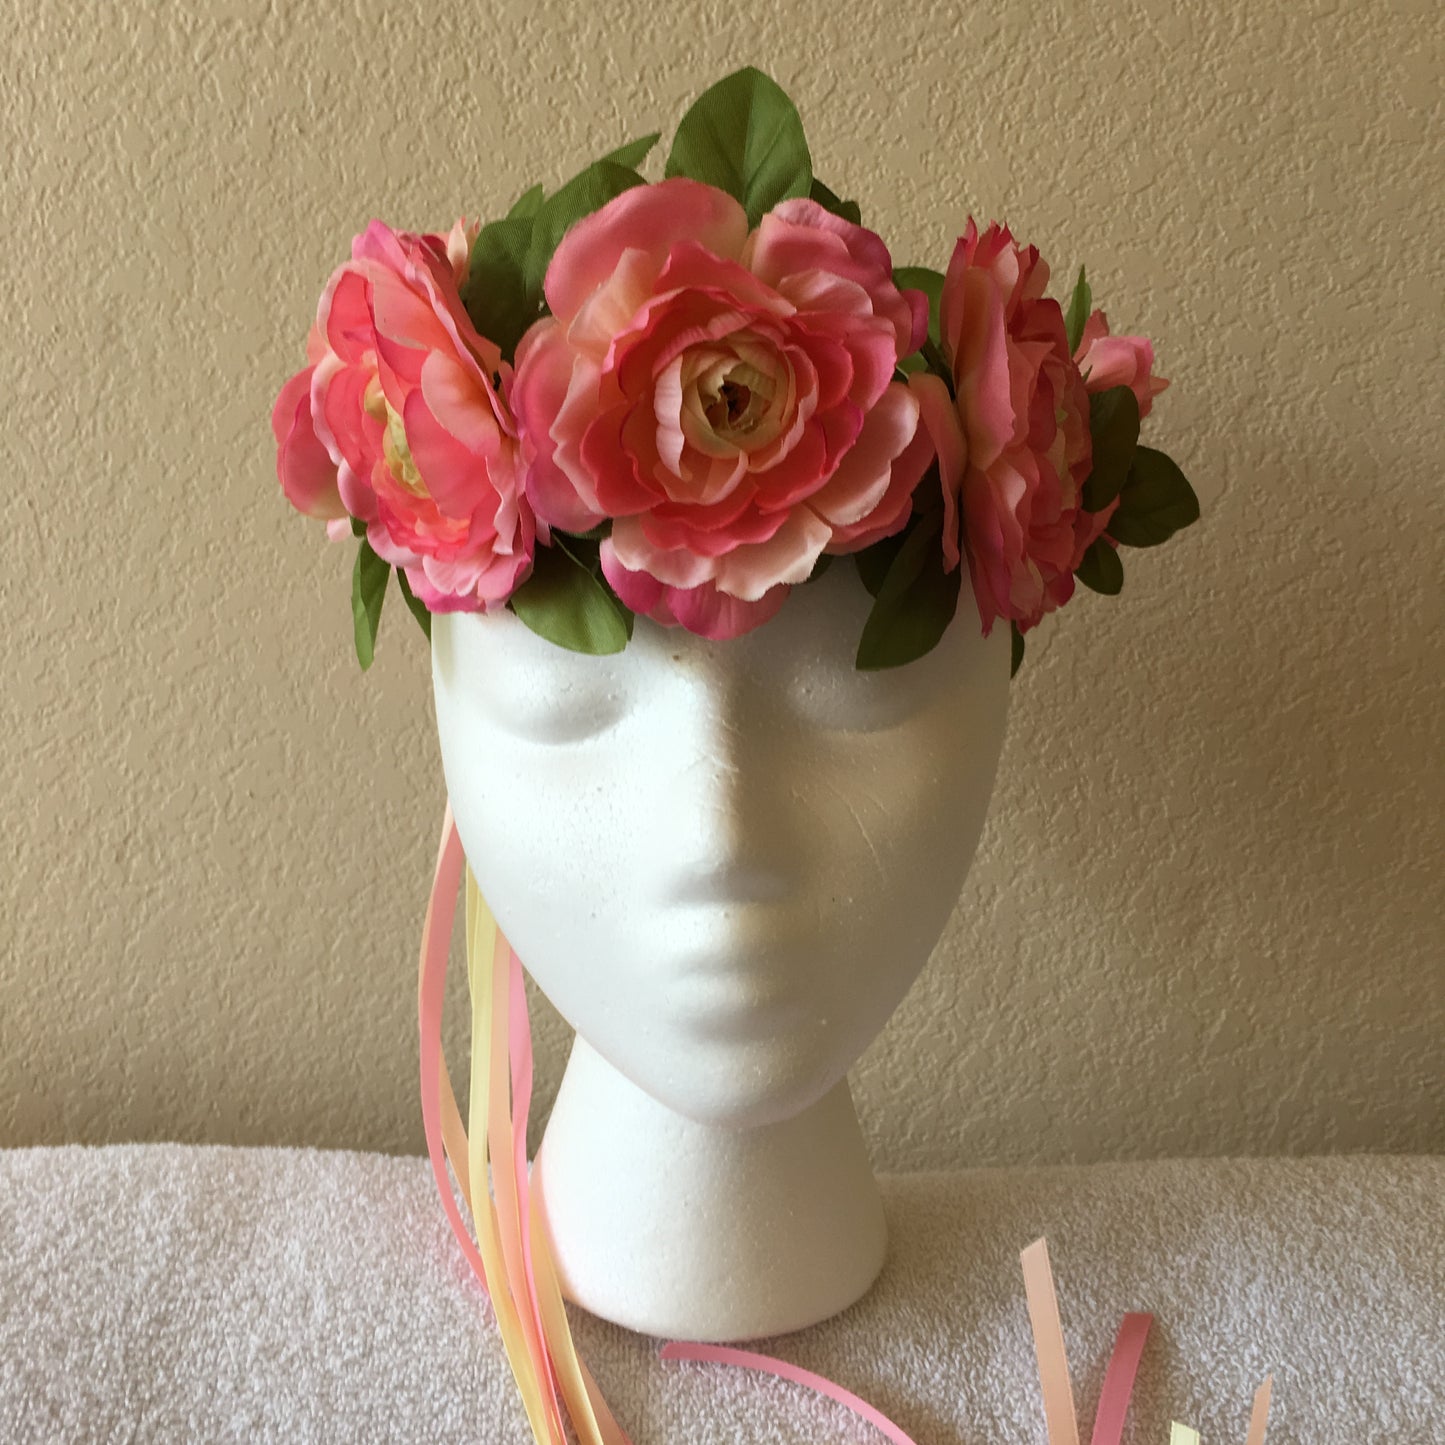 Medium Wreath - Pink w/ pale centered flowers w/ extra leaves